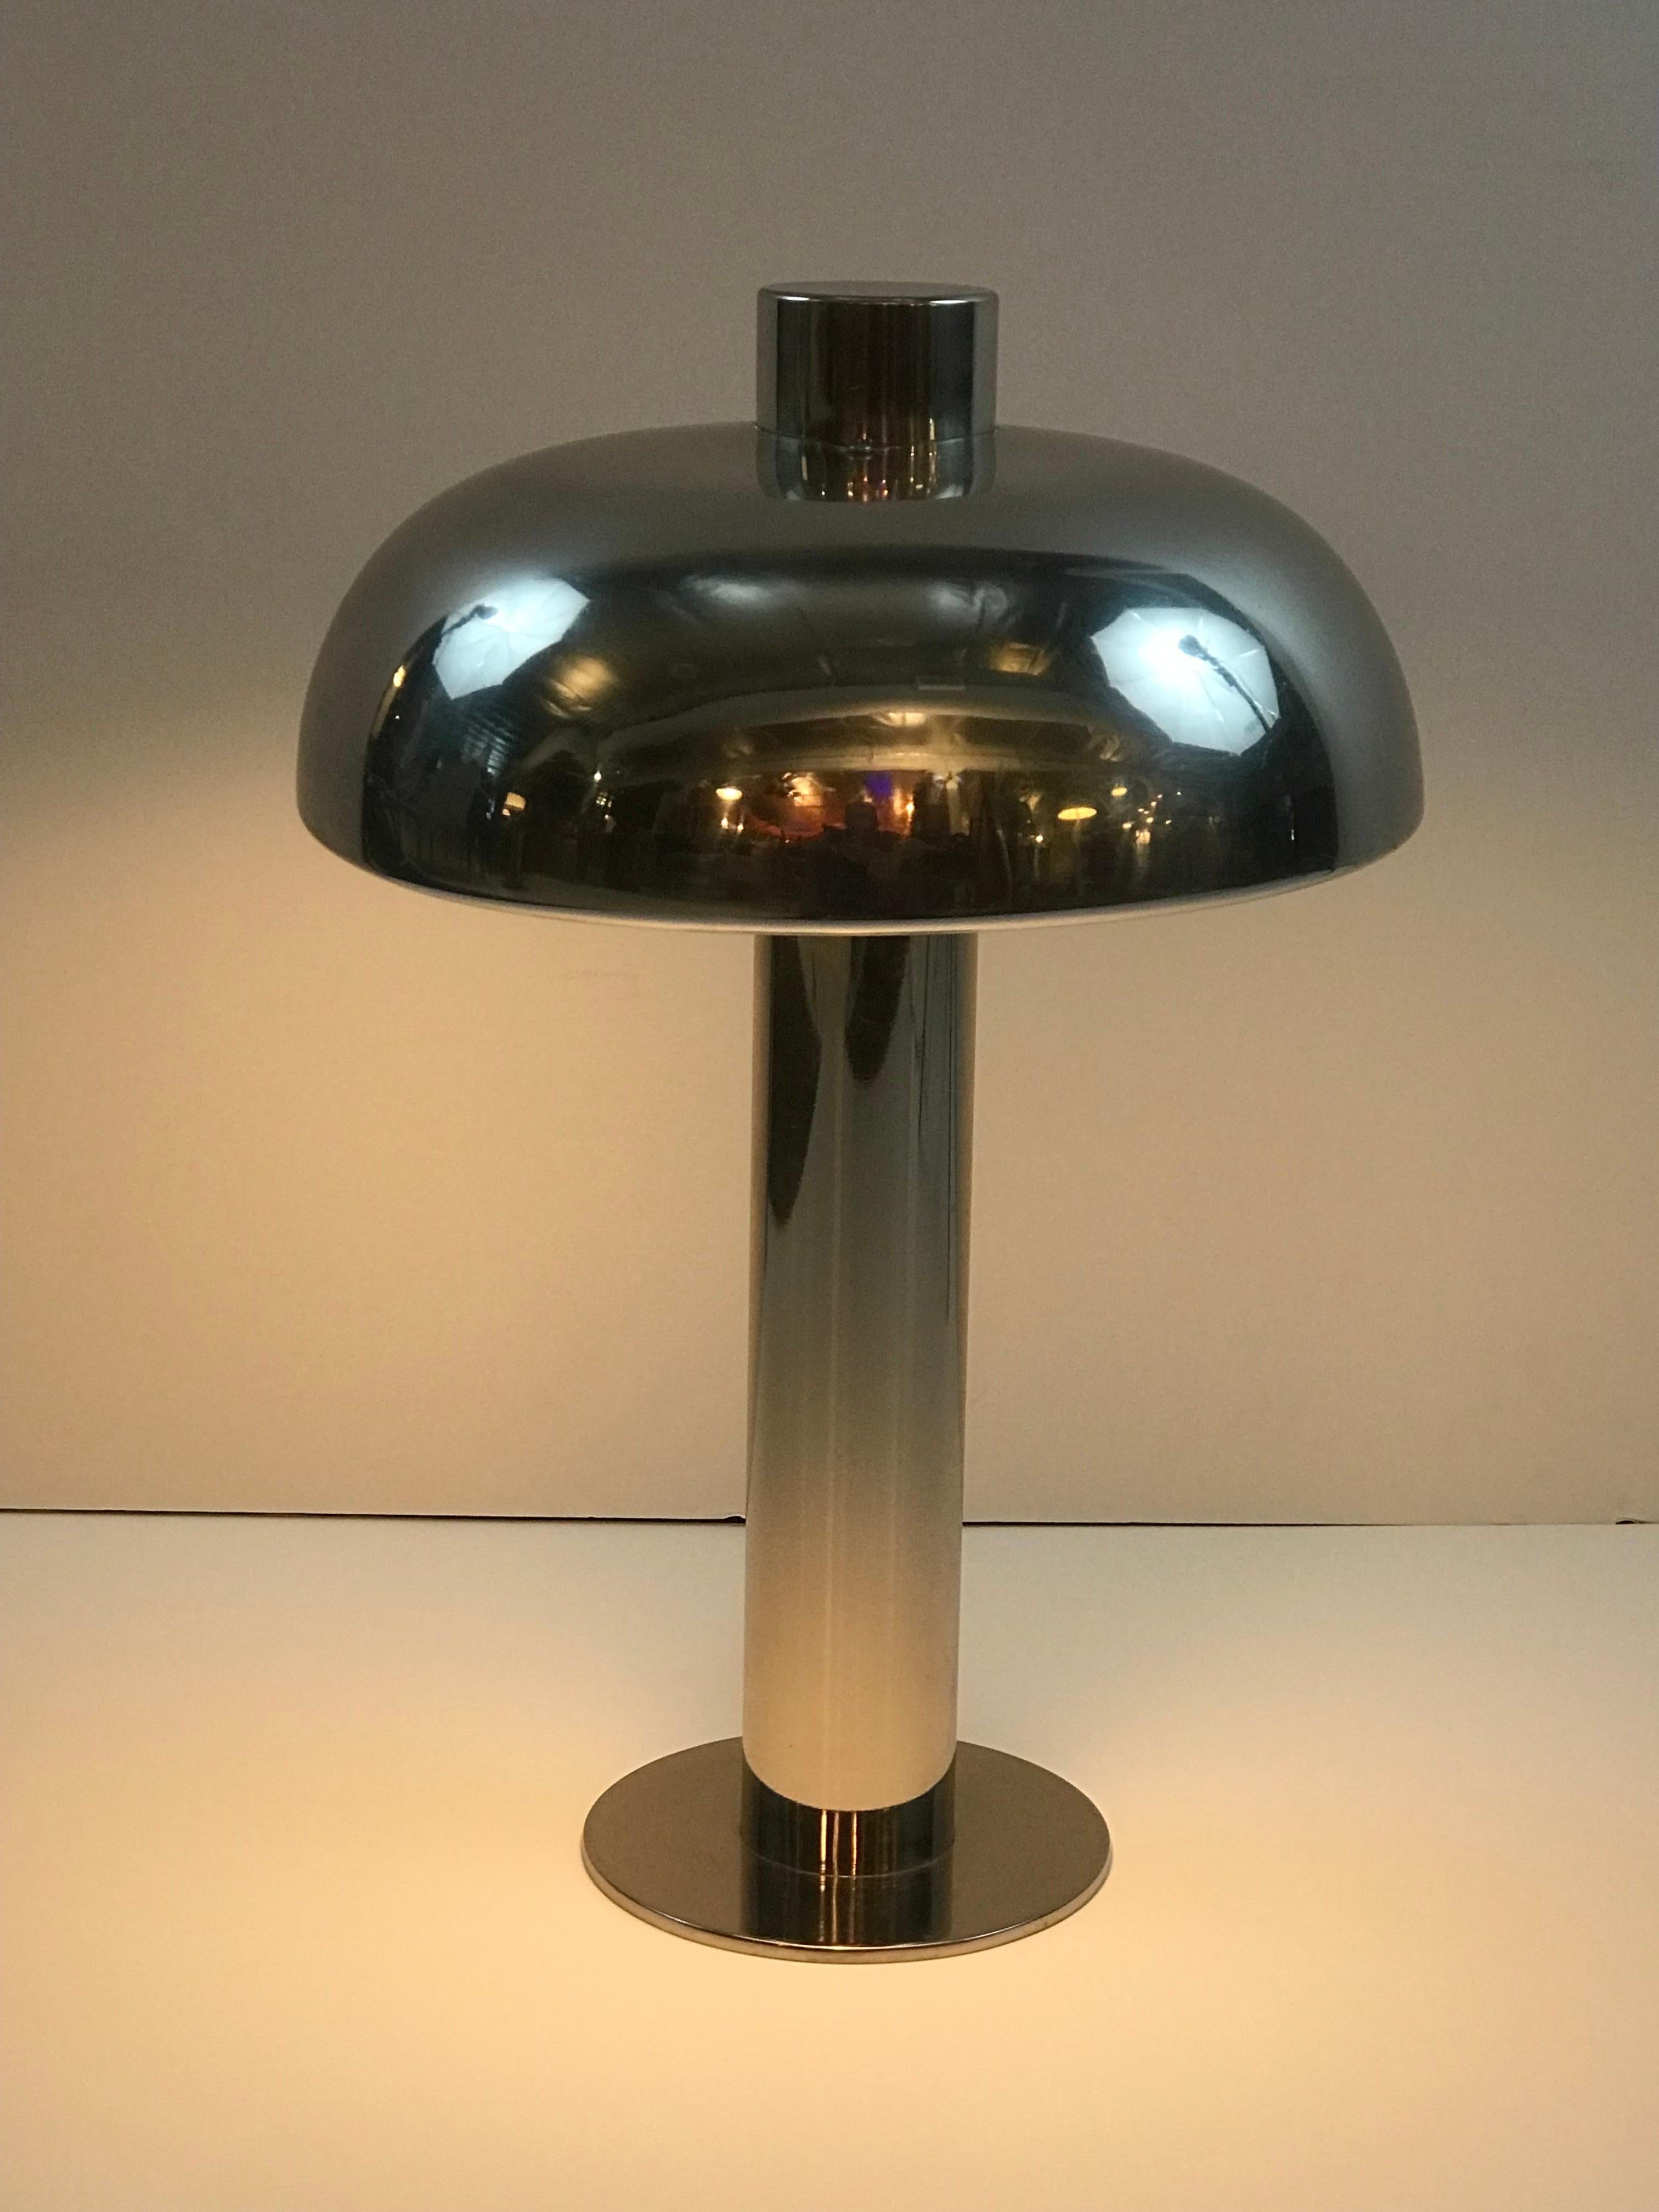 A unique form 1970's chromed steel and spun aluminum table lamp / desk lamp with a minimalist sculptural form with the cantilevered spun aluminum shade off set from its cylindrical column and base. shade is power coated white on the underside and